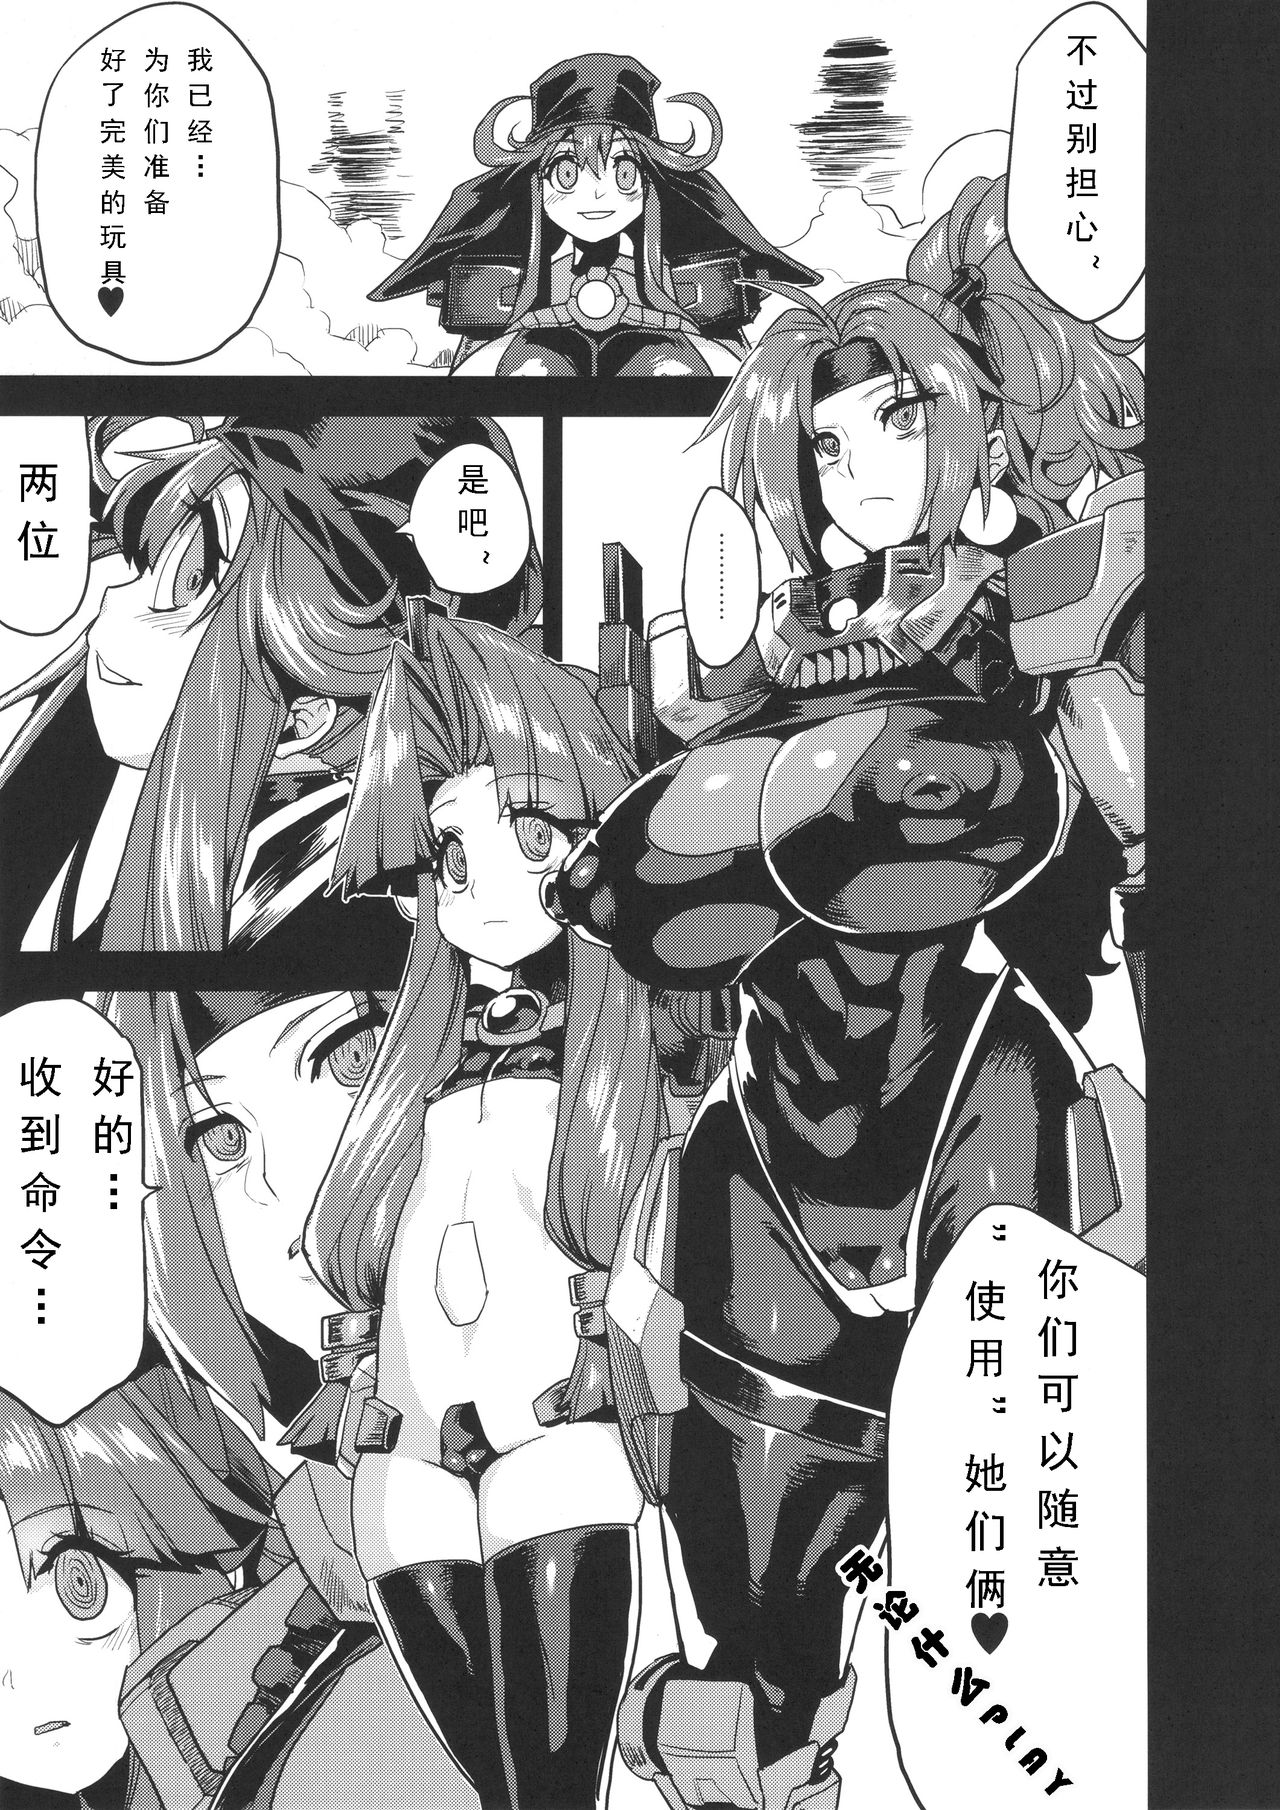 (C89) [OVing (Obui)] Hentai Marionette 4 (Saber Marionette J) [Chinese] [可乐个人汉化] page 7 full